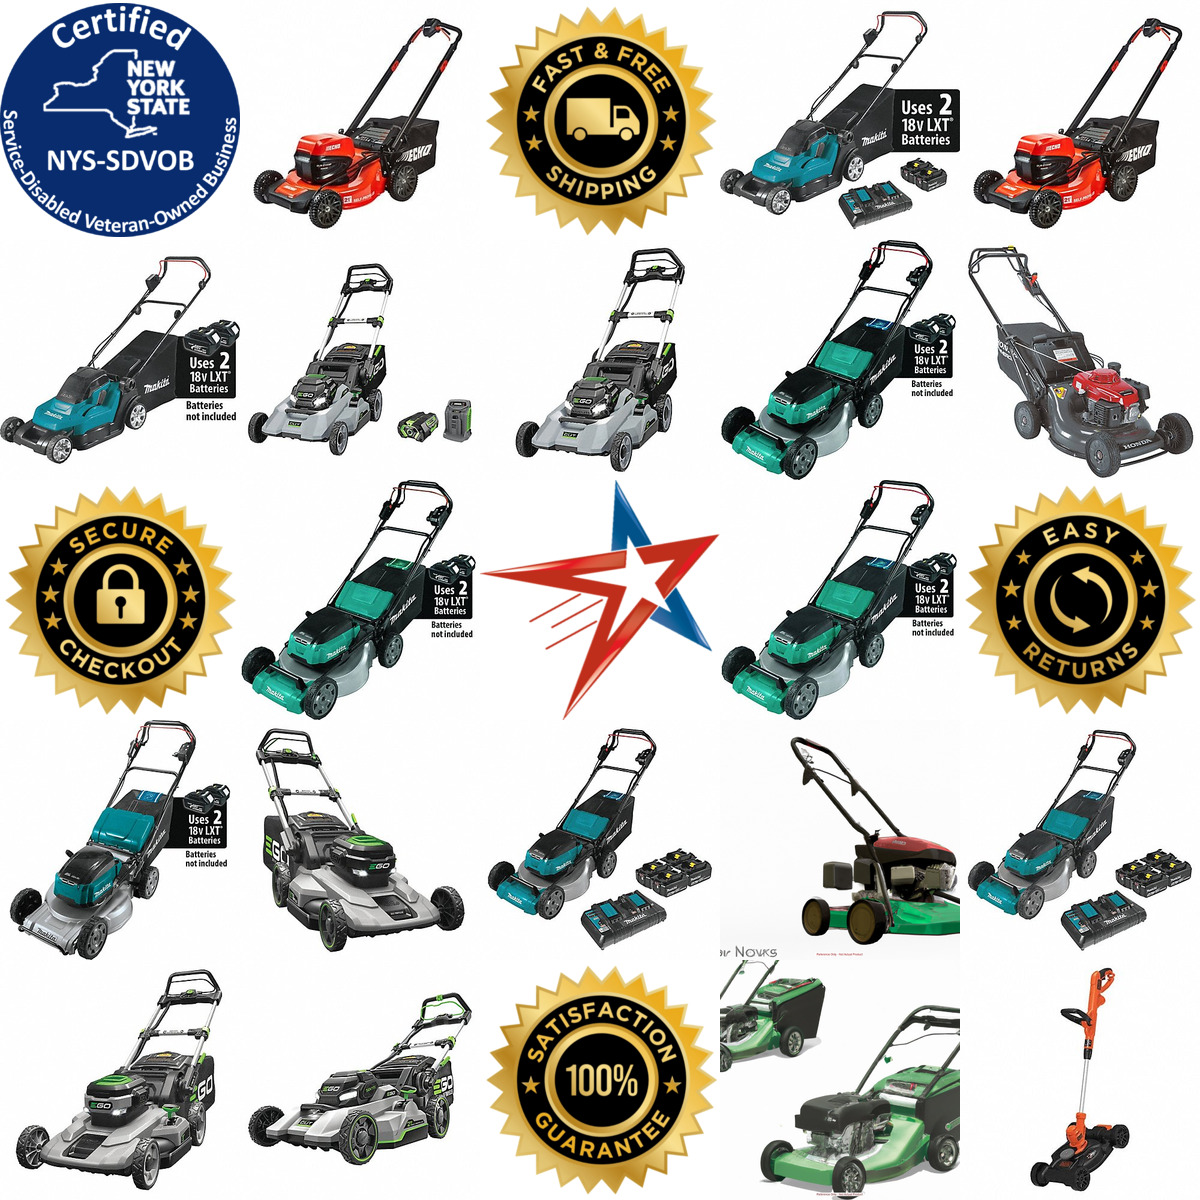 A selection of Lawn Mowers products on GoVets